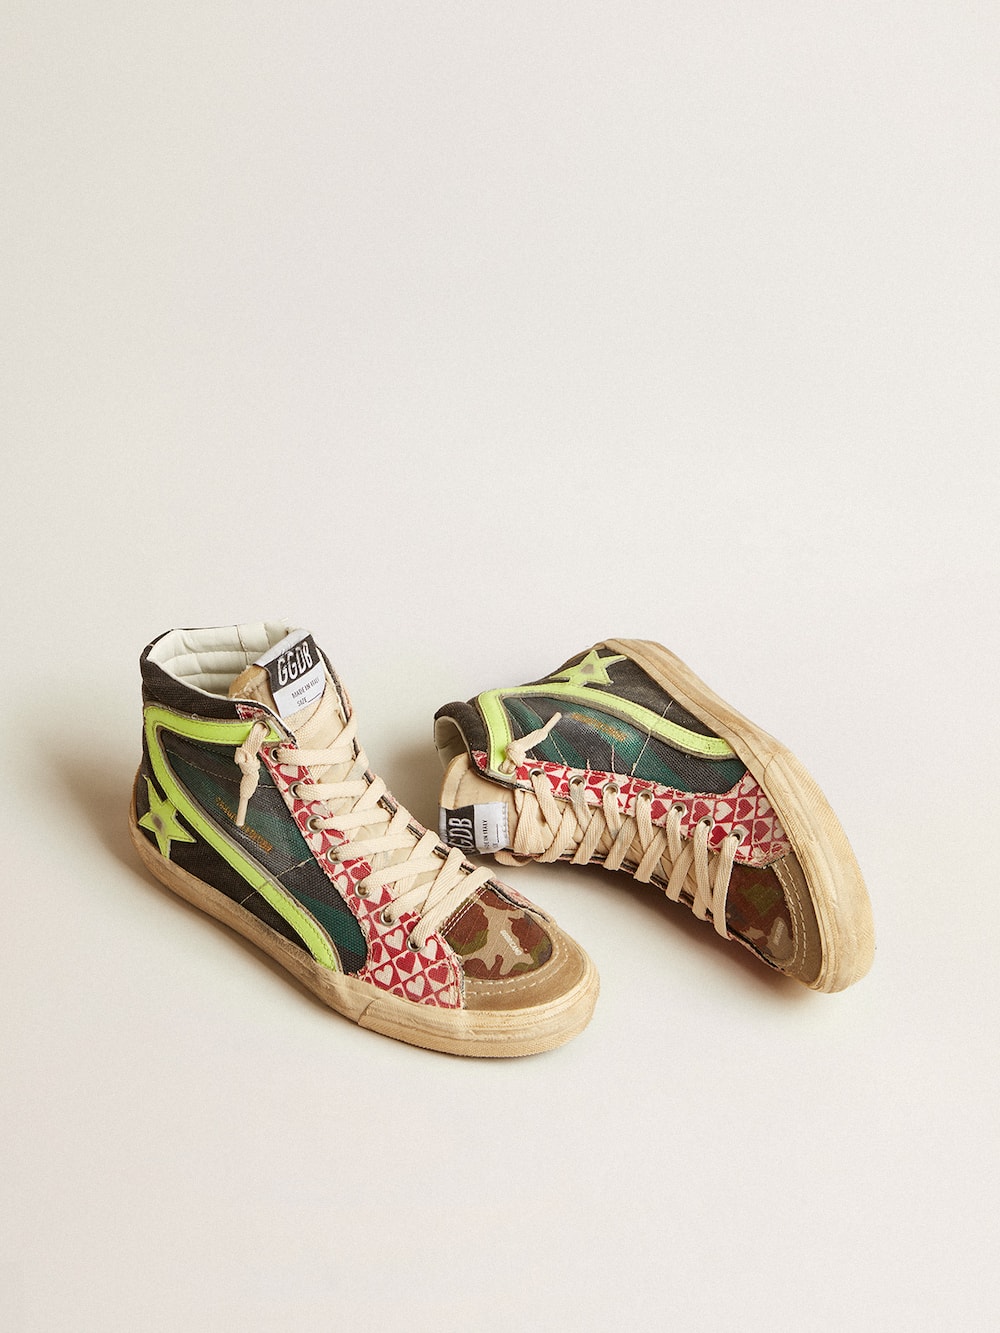 Golden Goose - Women’s Slide LAB in camo canvas with yellow leather star and flash in 